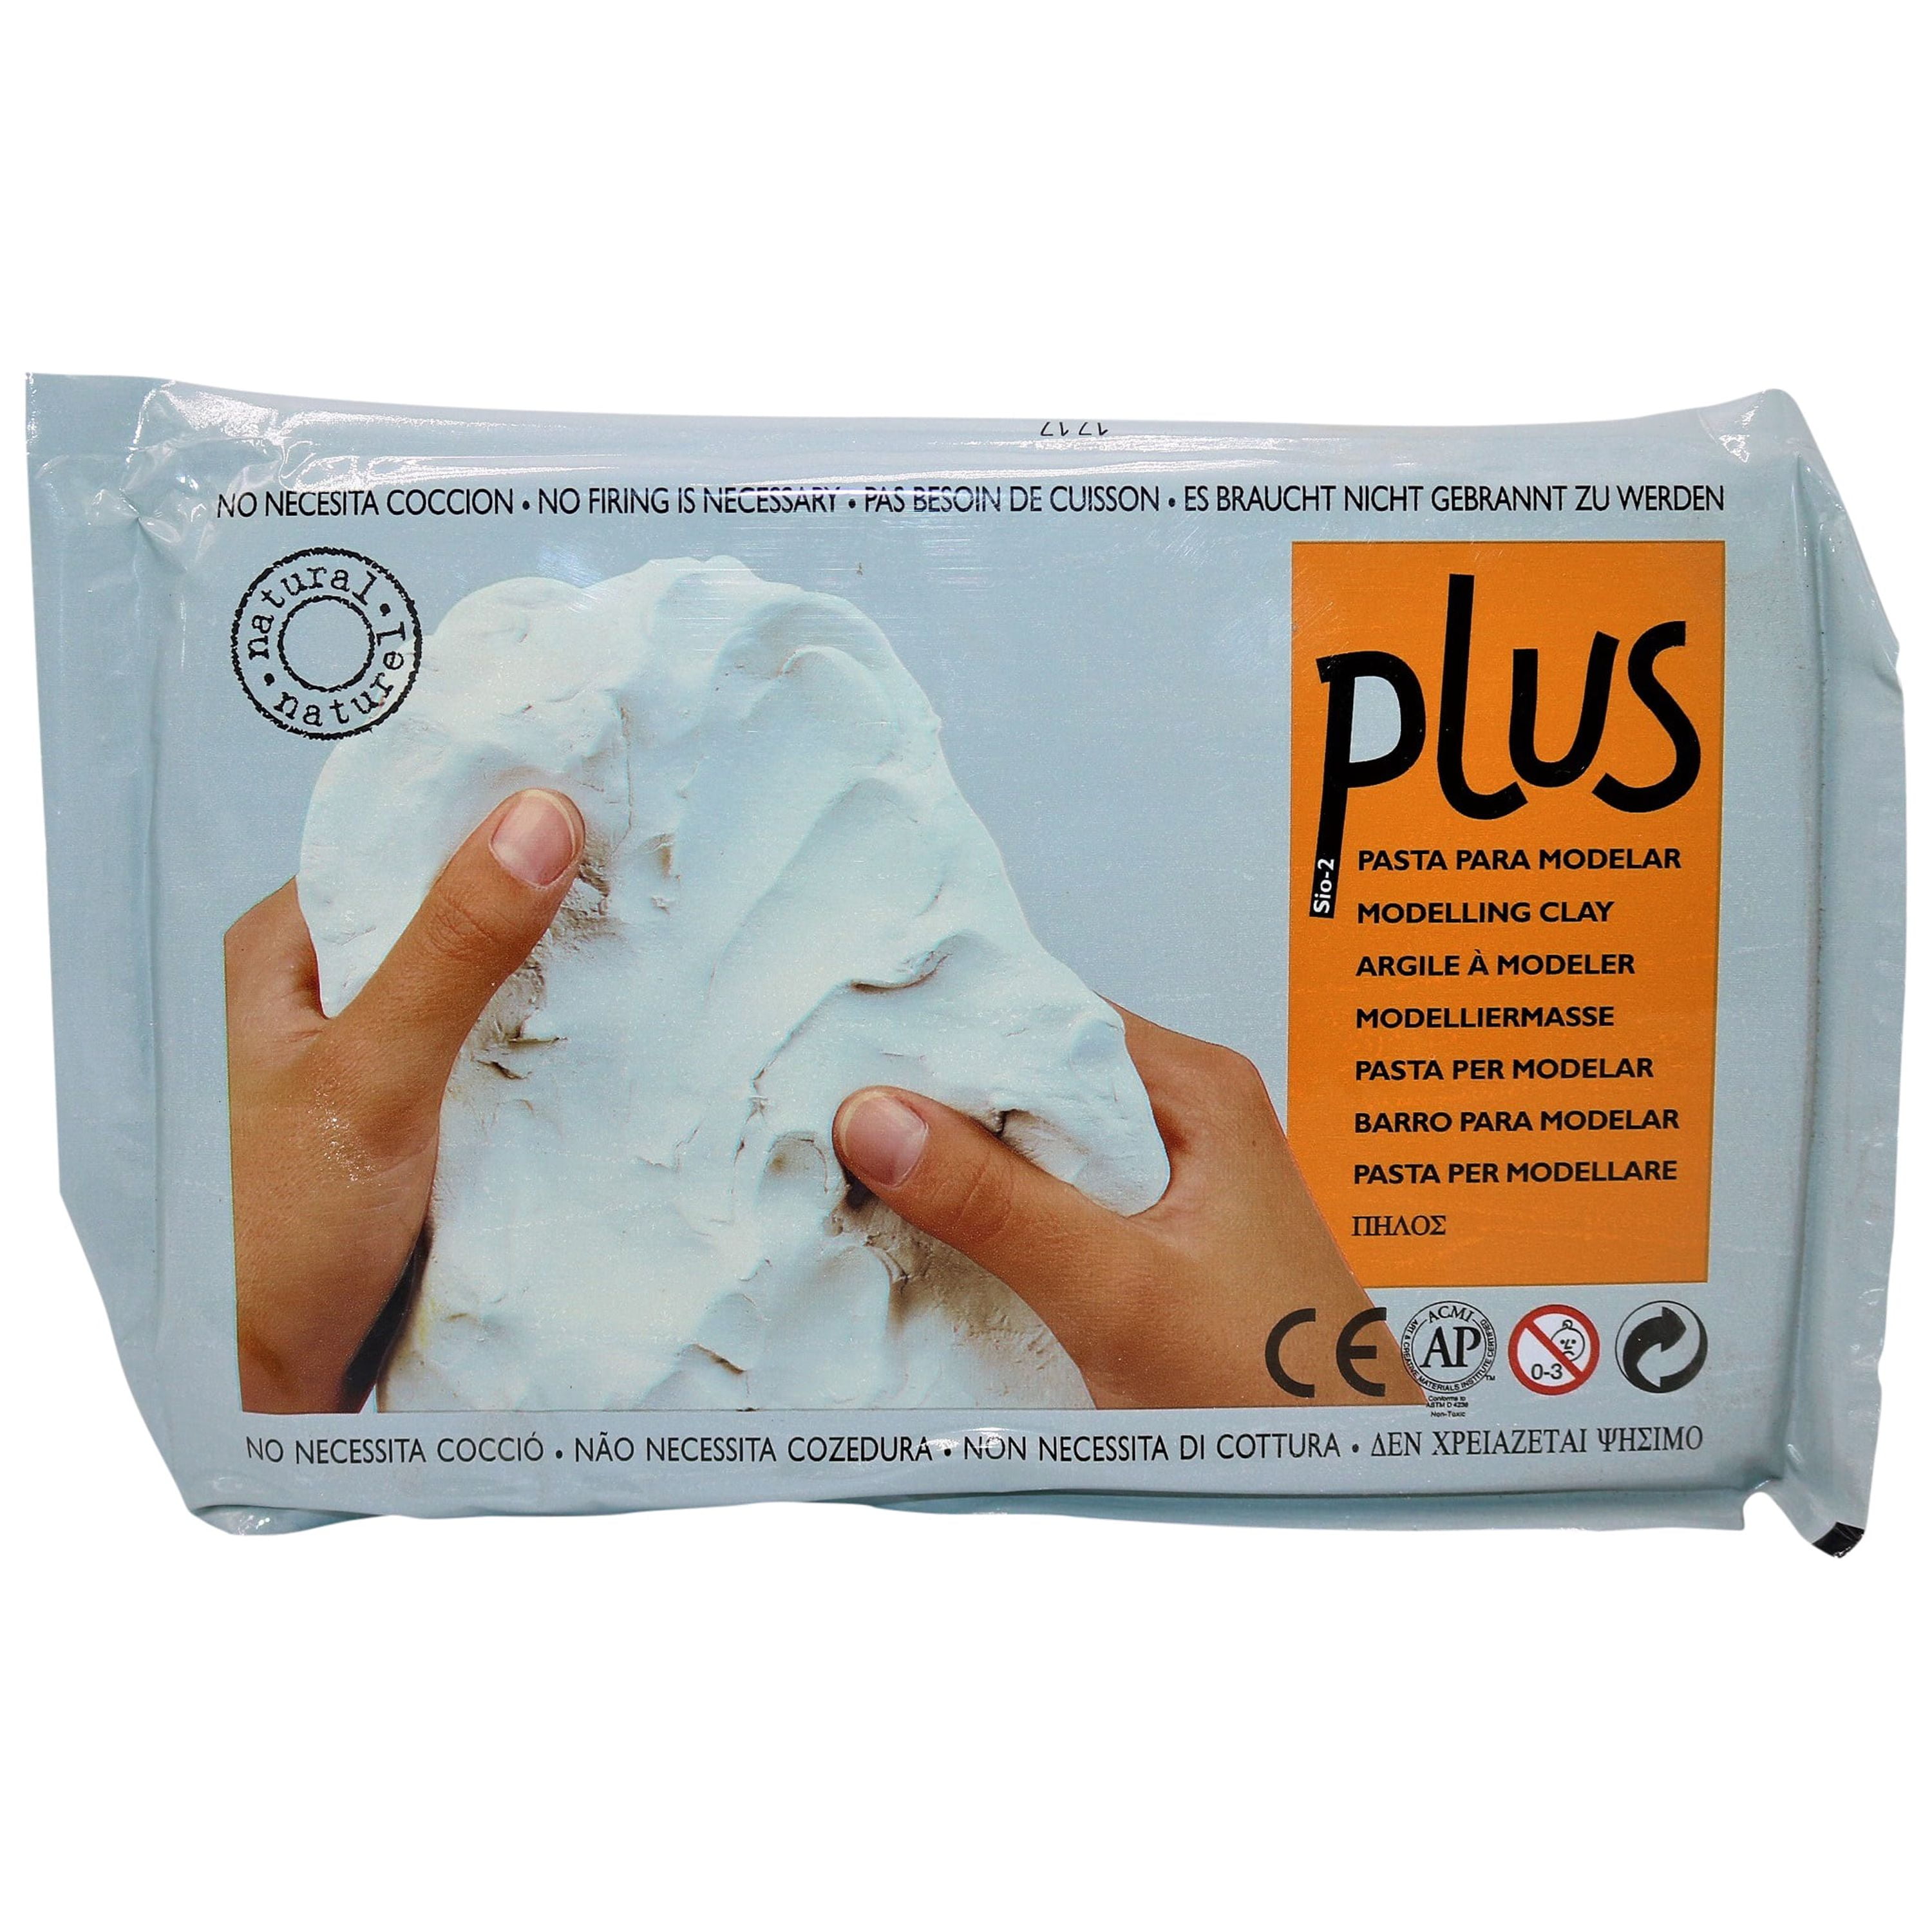 The Teachers' Lounge®  Activ-Clay™ Air Dry Clay, White, 3.3 lbs.